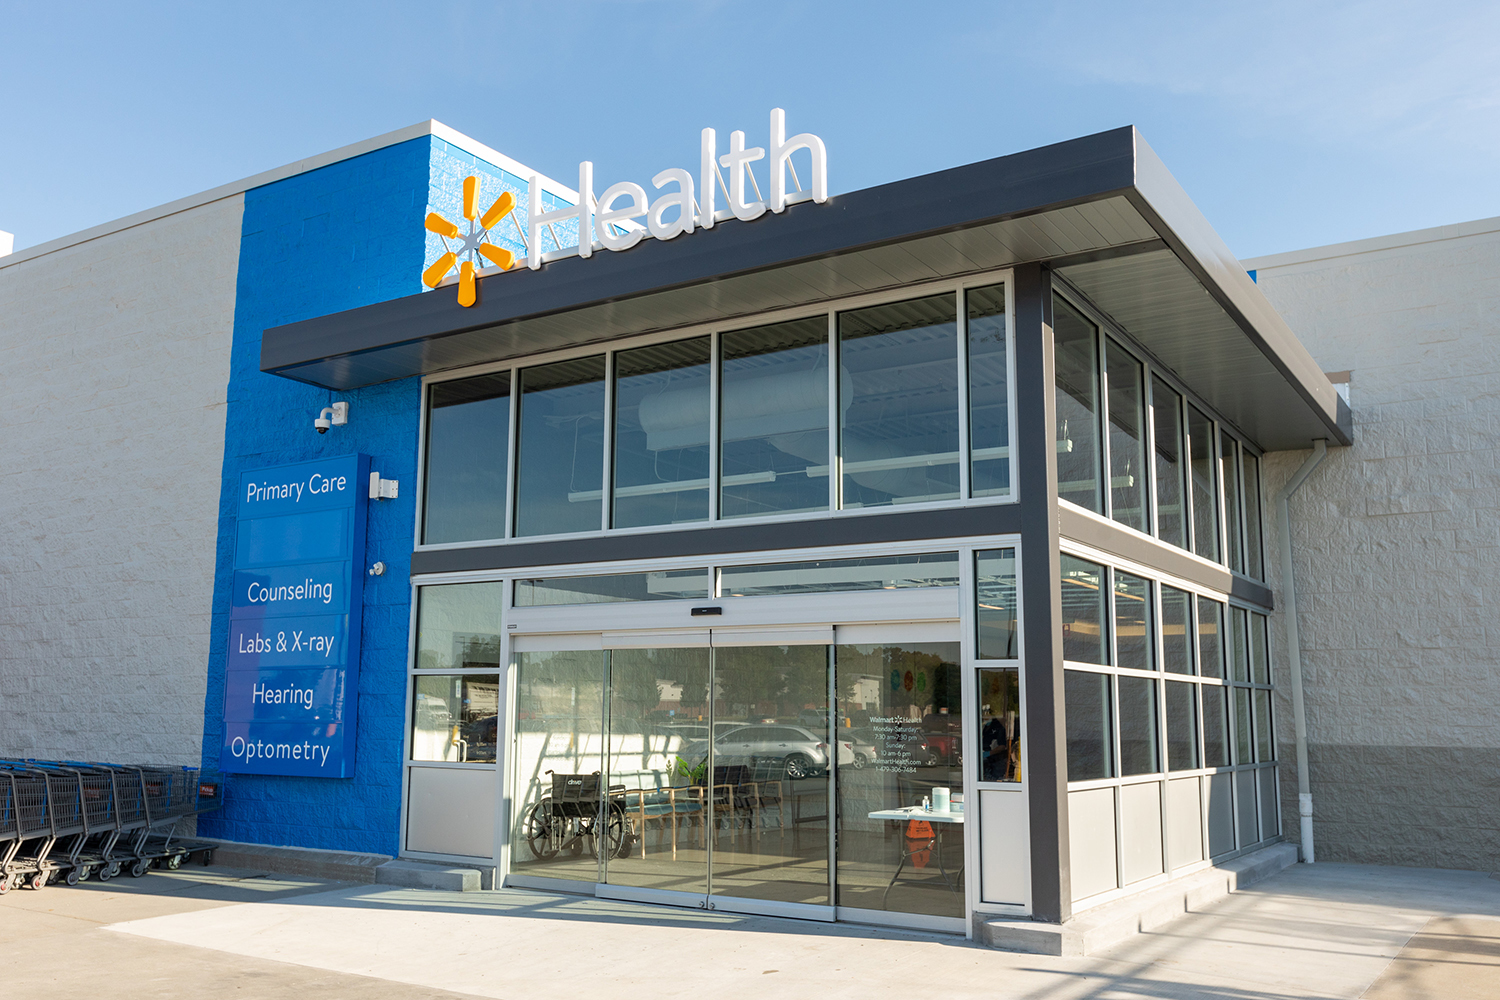 Walmart Health plans at least seven clinics in Northeast Florida. The clinics are built alongside Walmart stores. The company has opened the clinics in Arkansas, Illinois, Georgia and Texas.